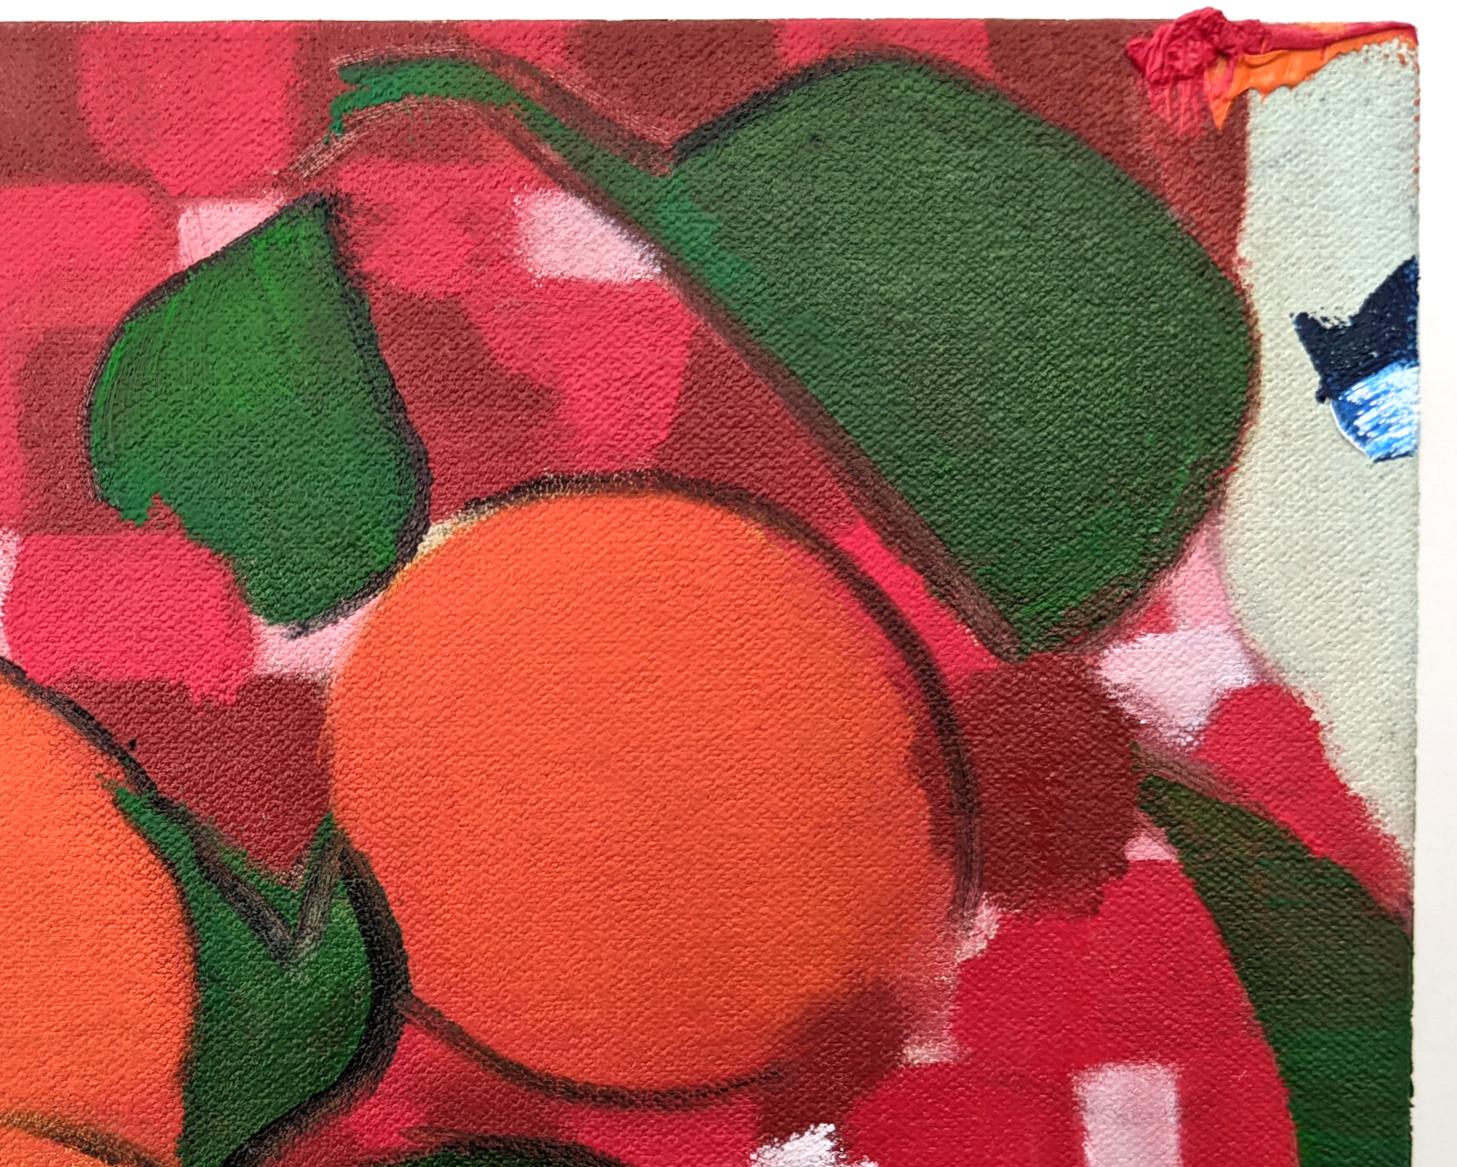 Still Life (Citrus With Drapery) - colorful, abstract, oil on canvas on panel - Contemporary Painting by Mel Davis